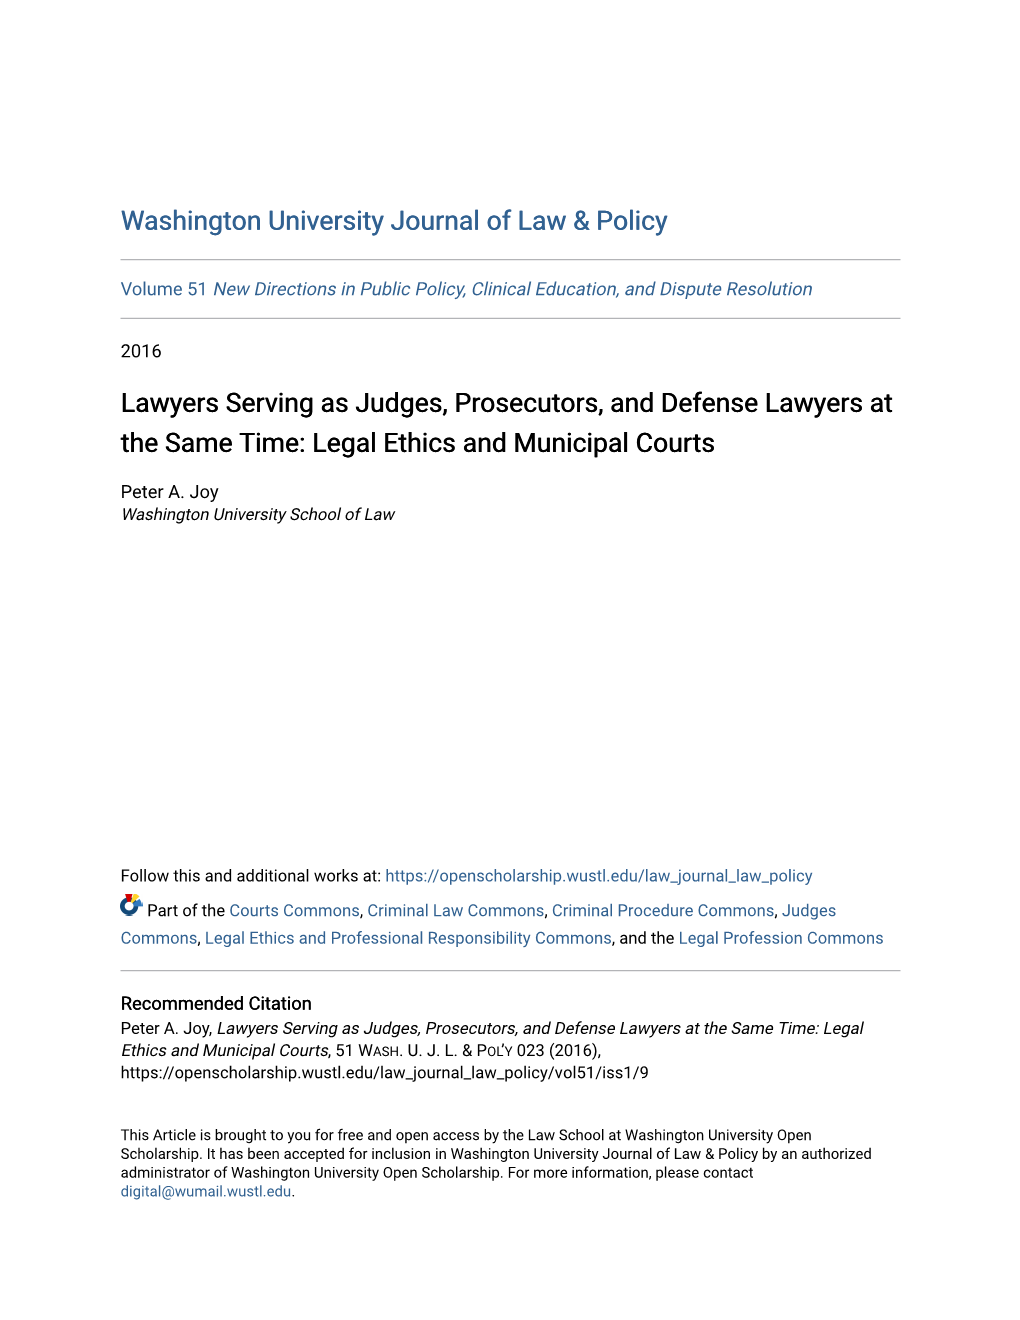 Lawyers Serving As Judges, Prosecutors, and Defense Lawyers at the Same Time: Legal Ethics and Municipal Courts